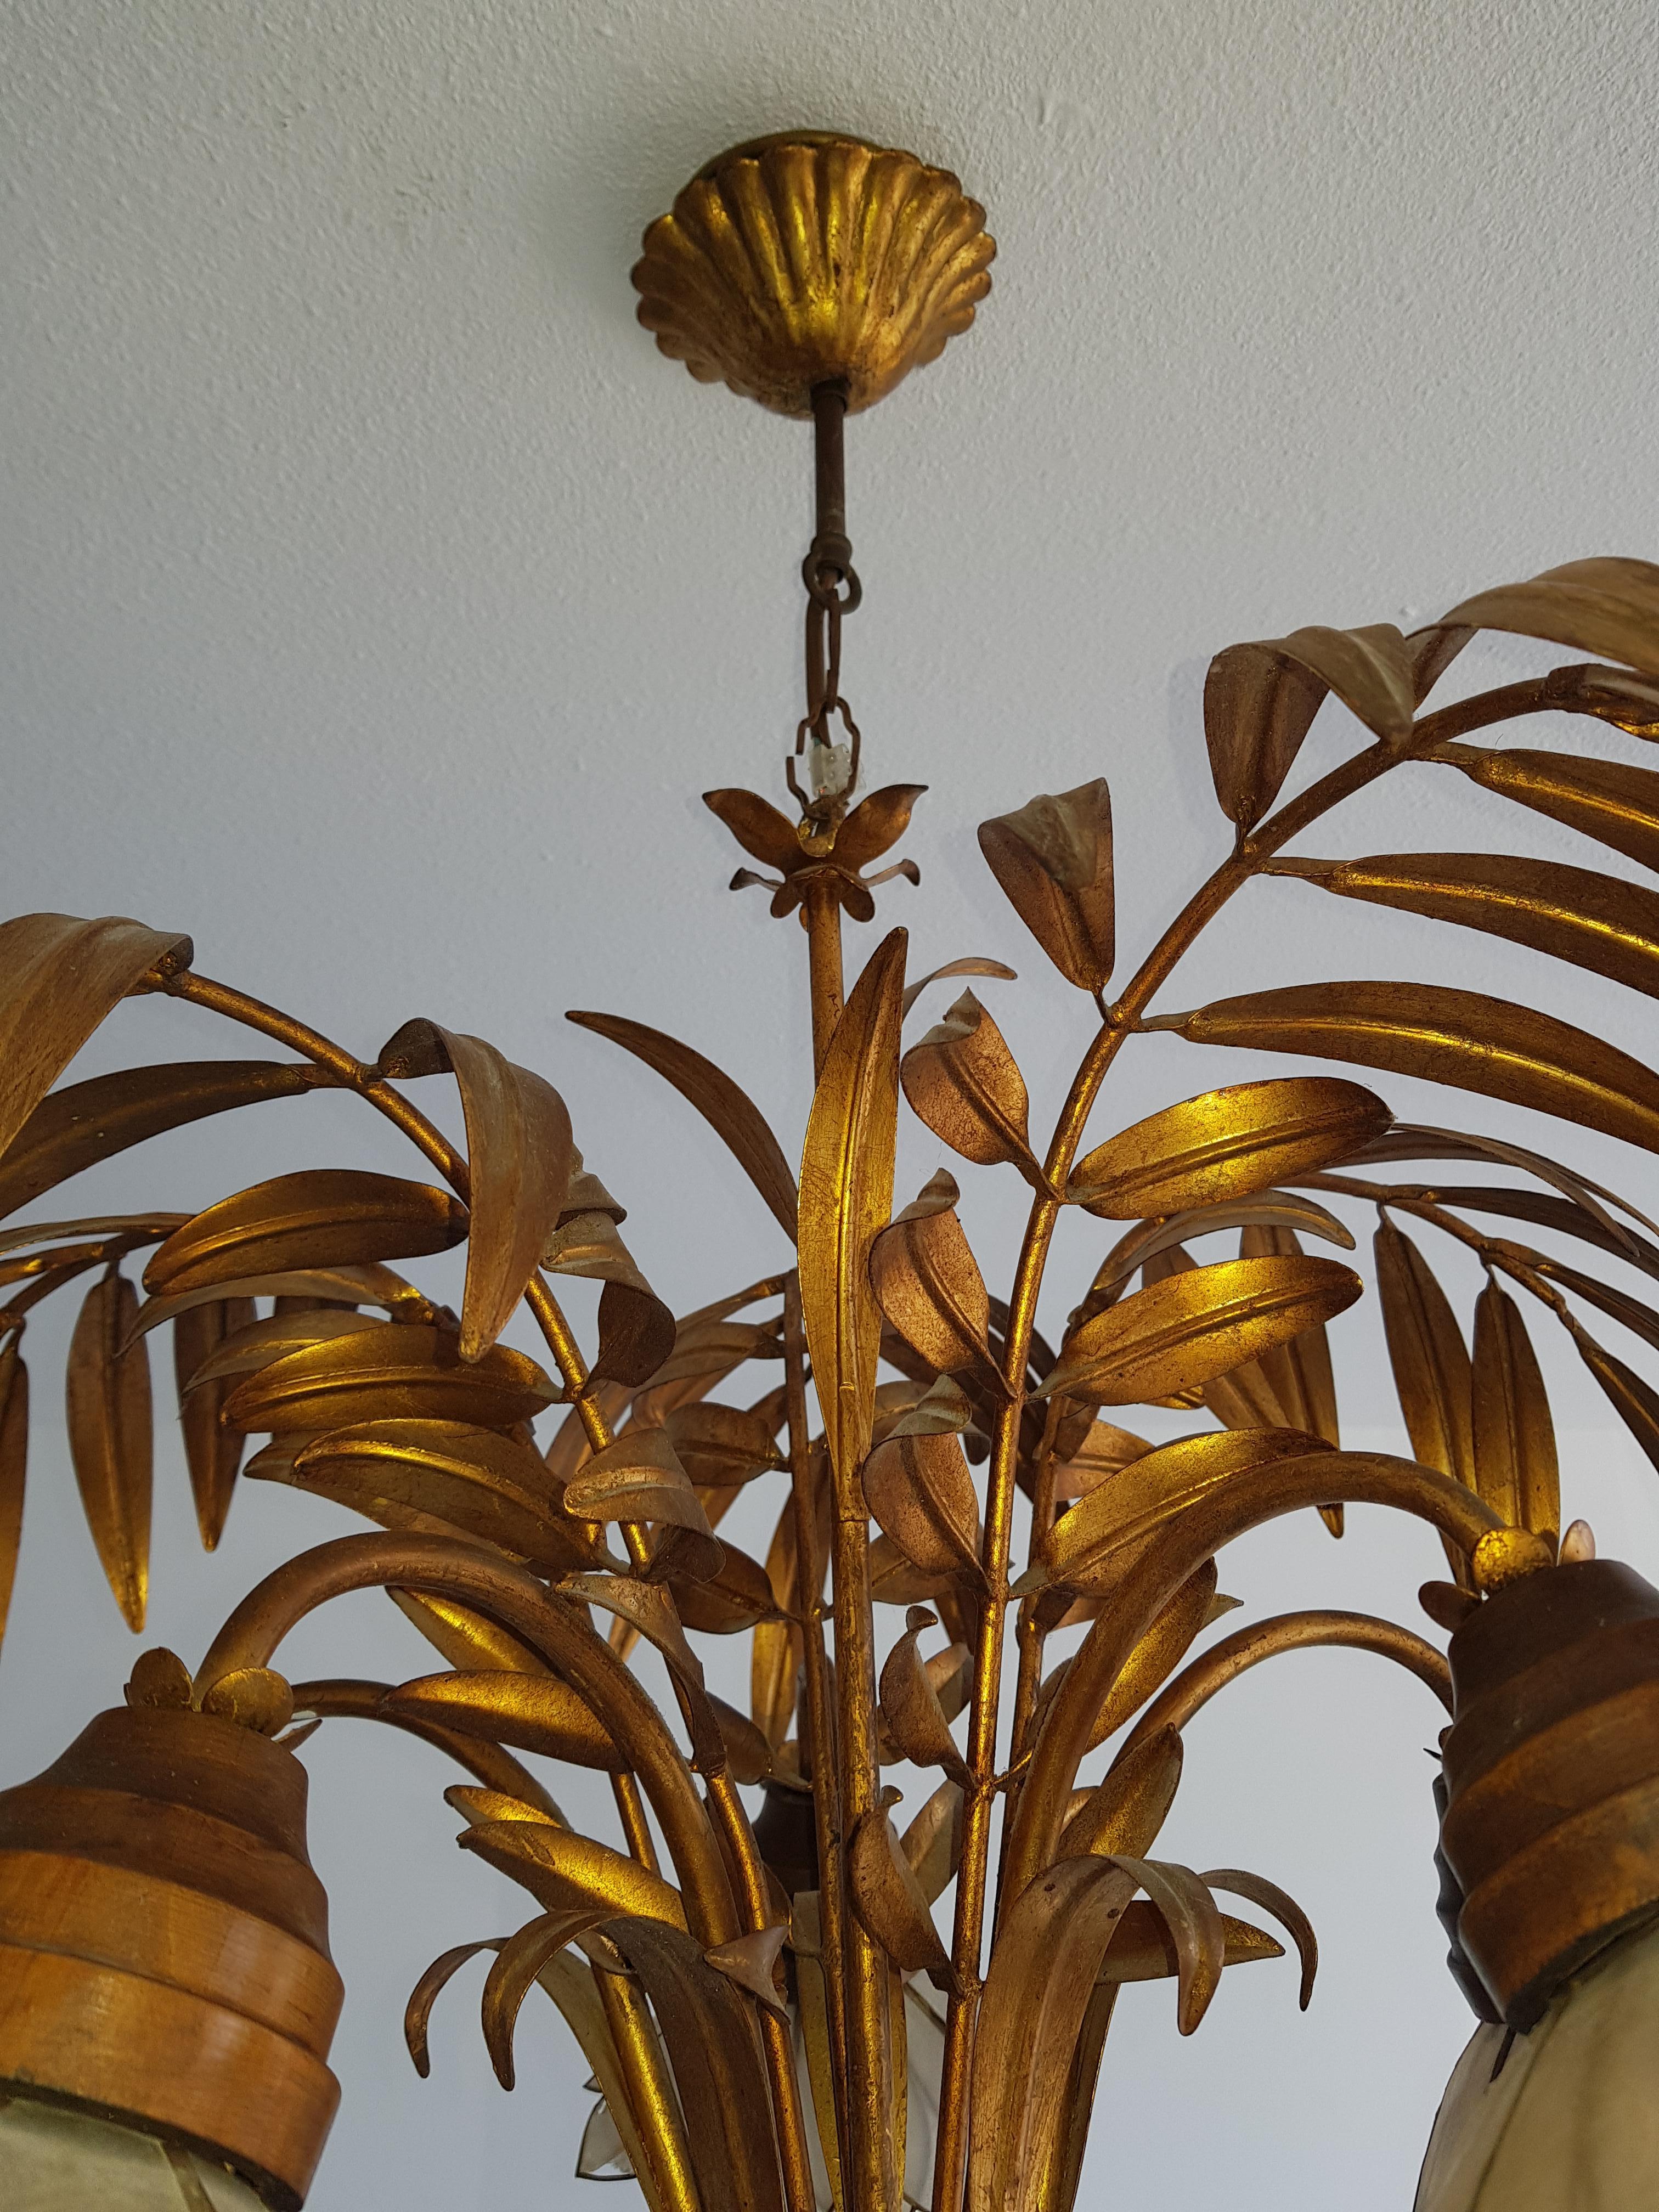 Vintage Palm leaf chandelier with mother of pearl blossom flowers, these are the bulb holders.
Designer could either be French or German as we see Hans Kogel has kind of items
Just stunning
This item comes with free bulbs, and free